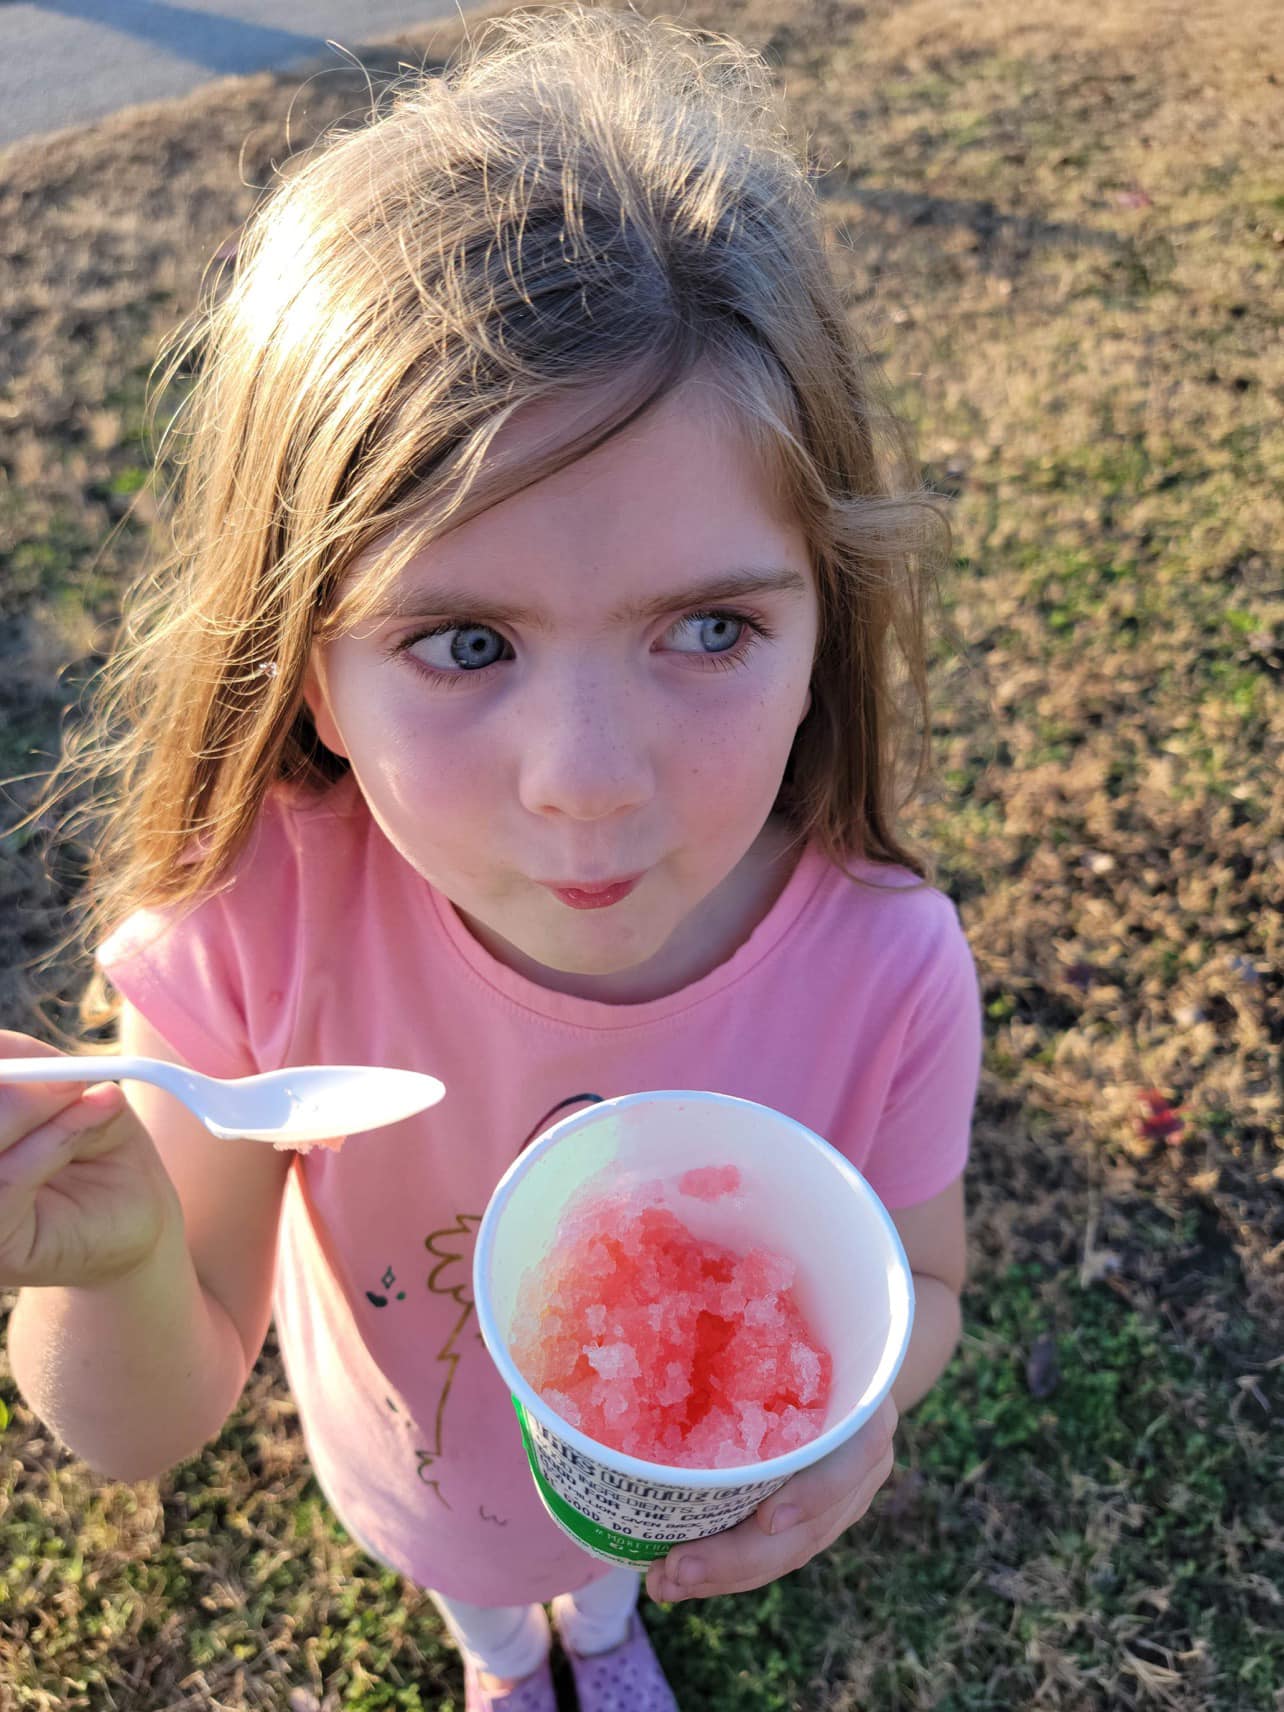 Student with a red snow cone